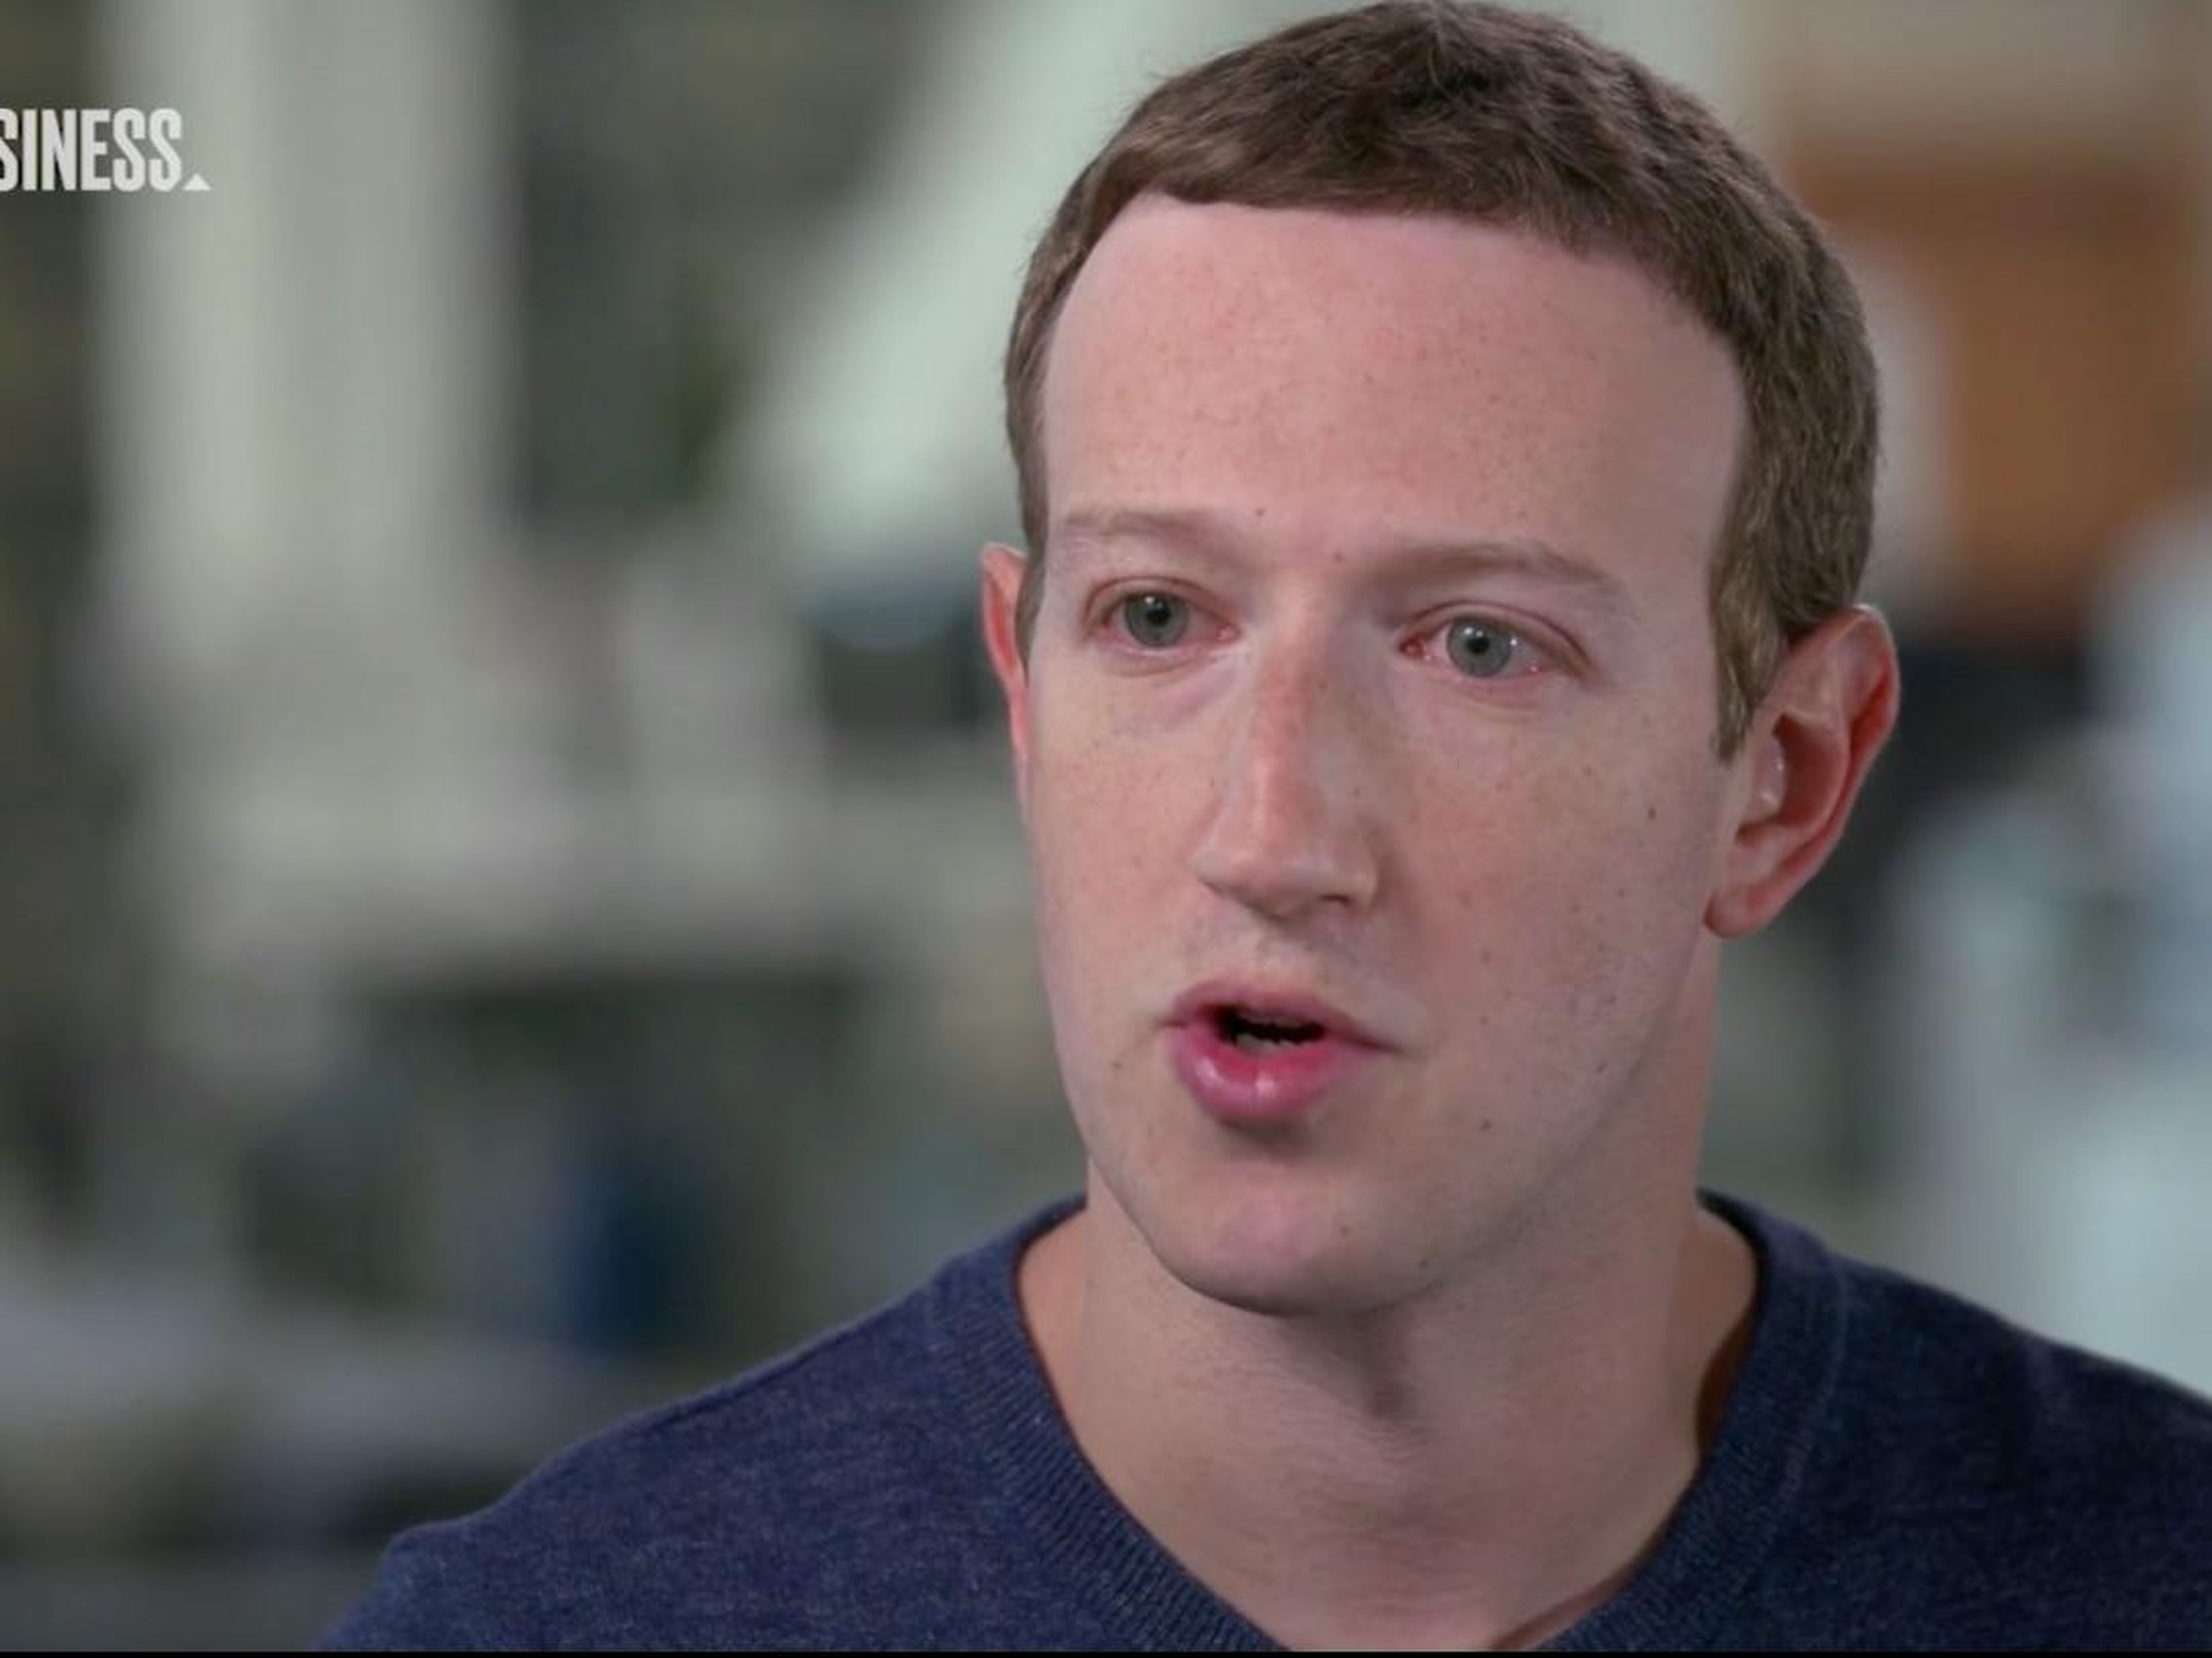 As Facebook stock steadily dropped starting in July, a defiant Zuckerberg told CNN in November he had no intentions of stepping down as Facebook's CEO.